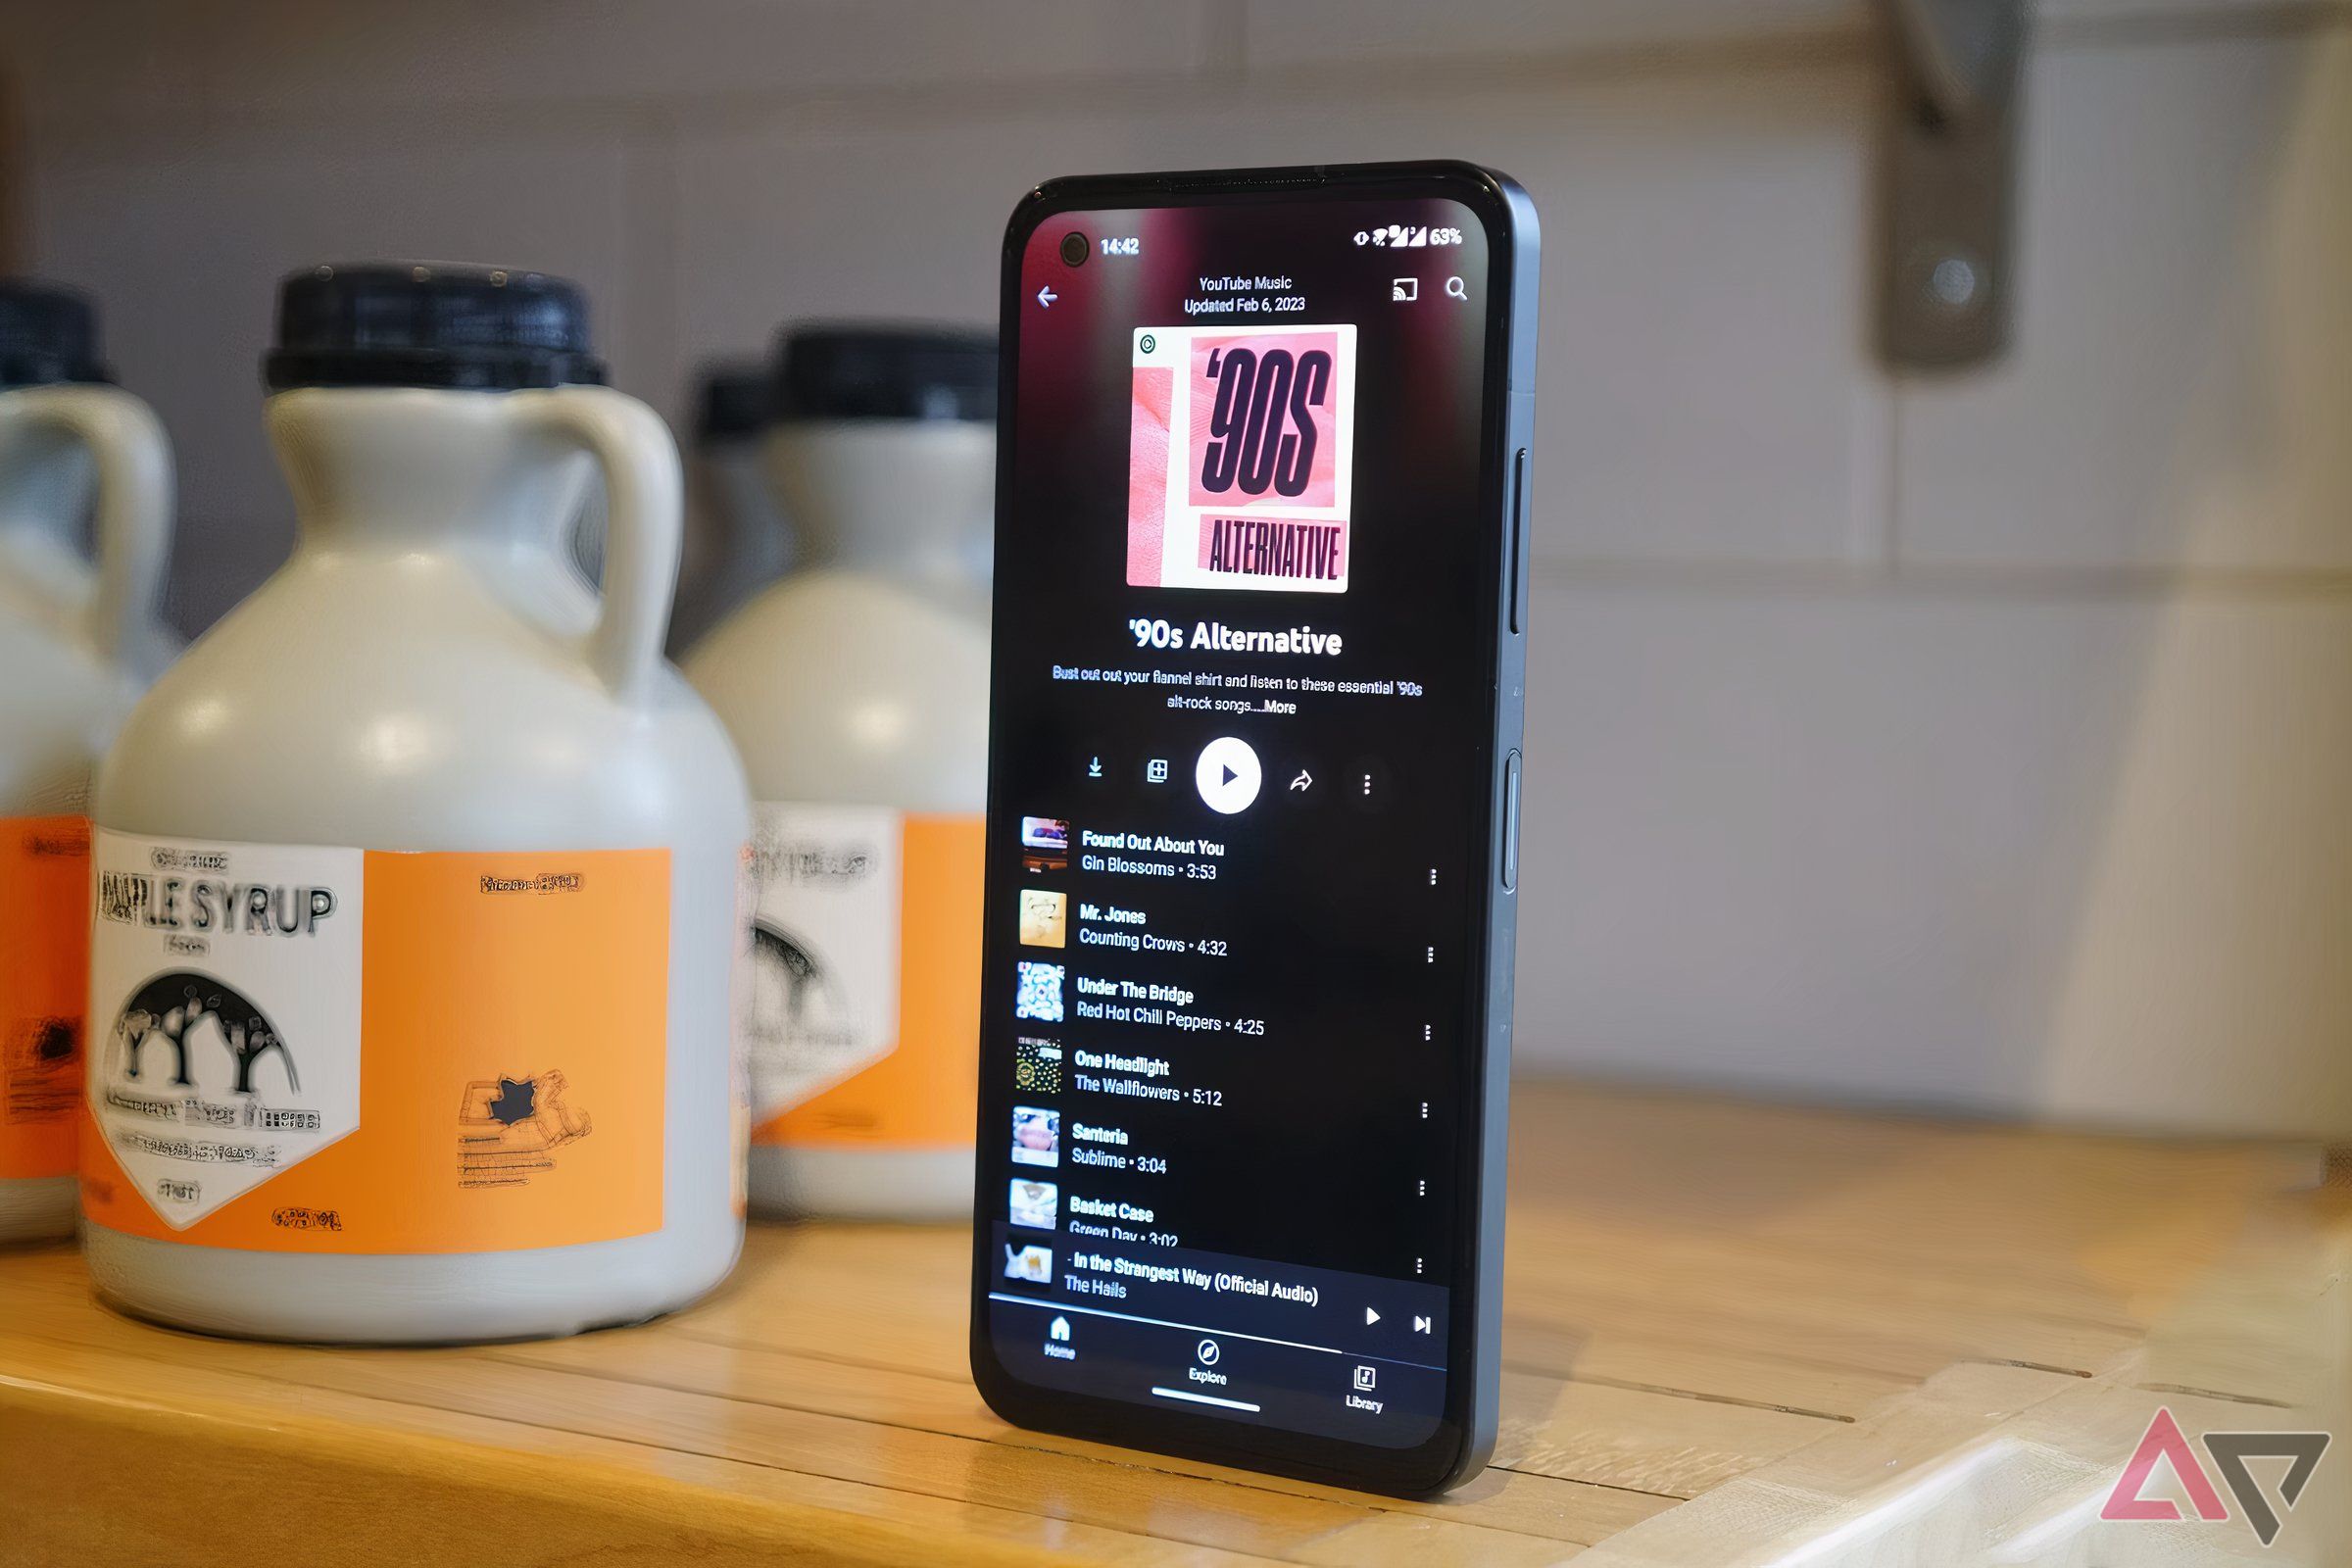 A phone's display showing a YouTube Music playlist.